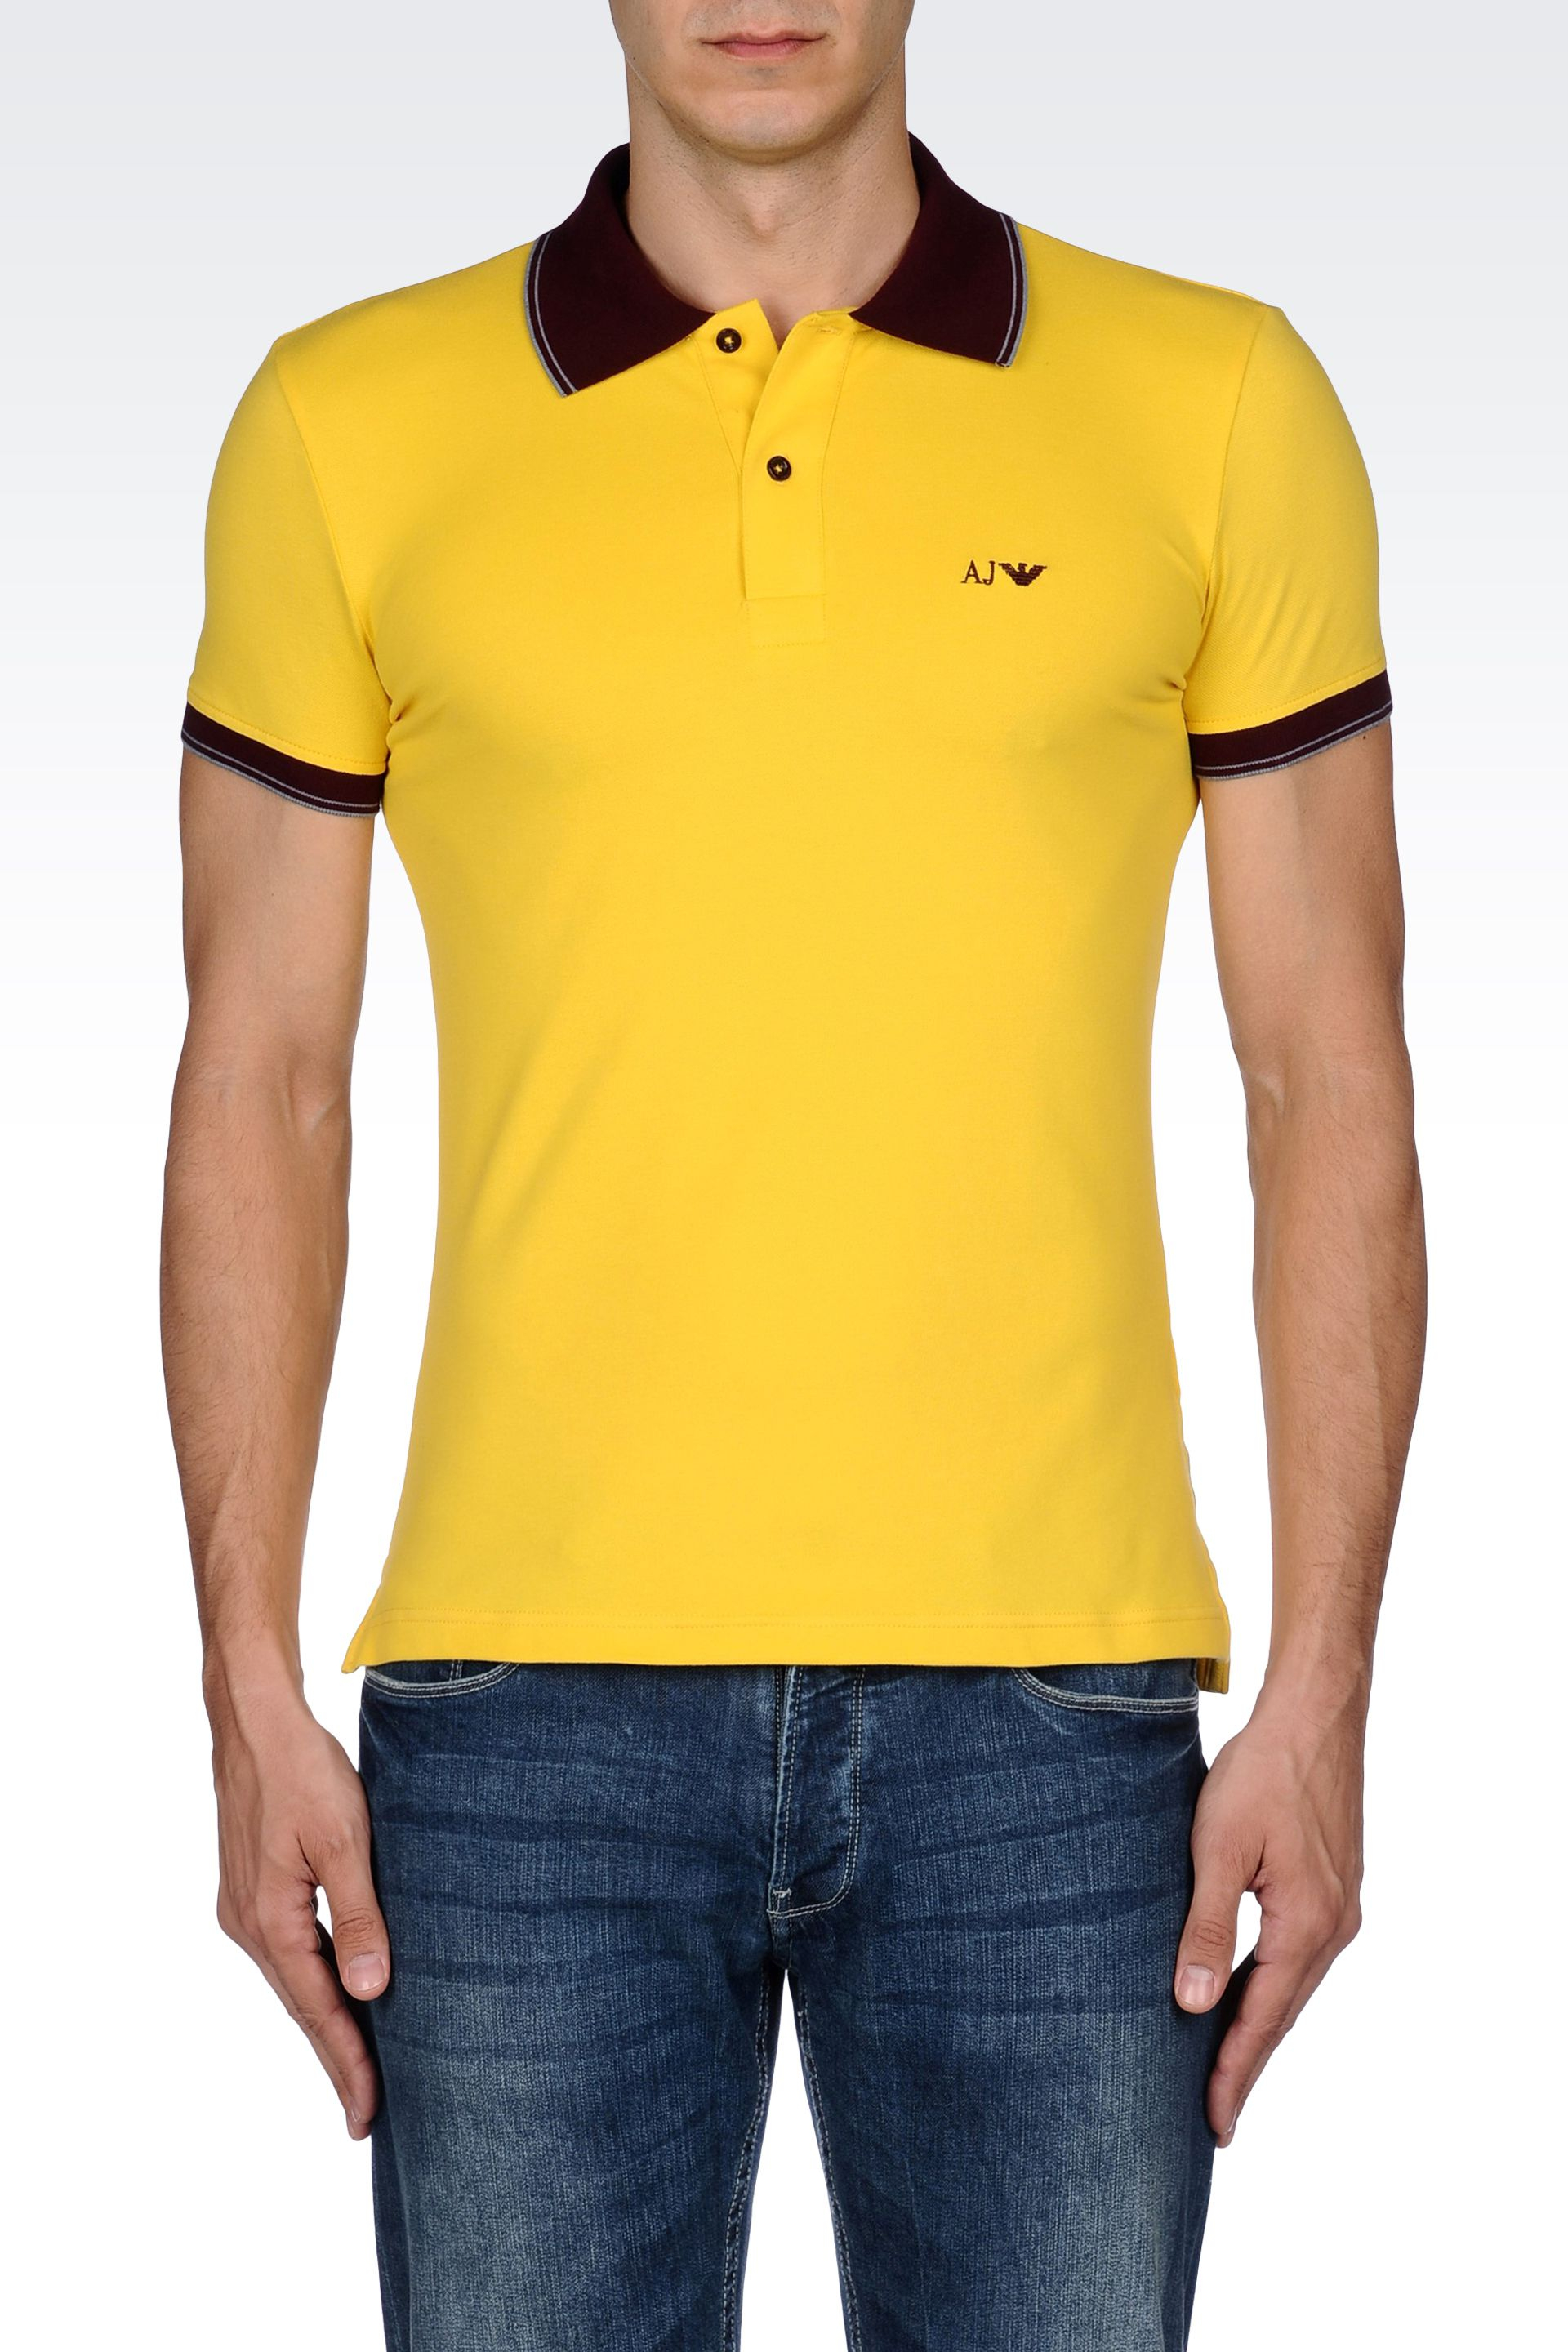 Armani jeans Polo Shirt In Cotton Pique in Yellow for Men | Lyst